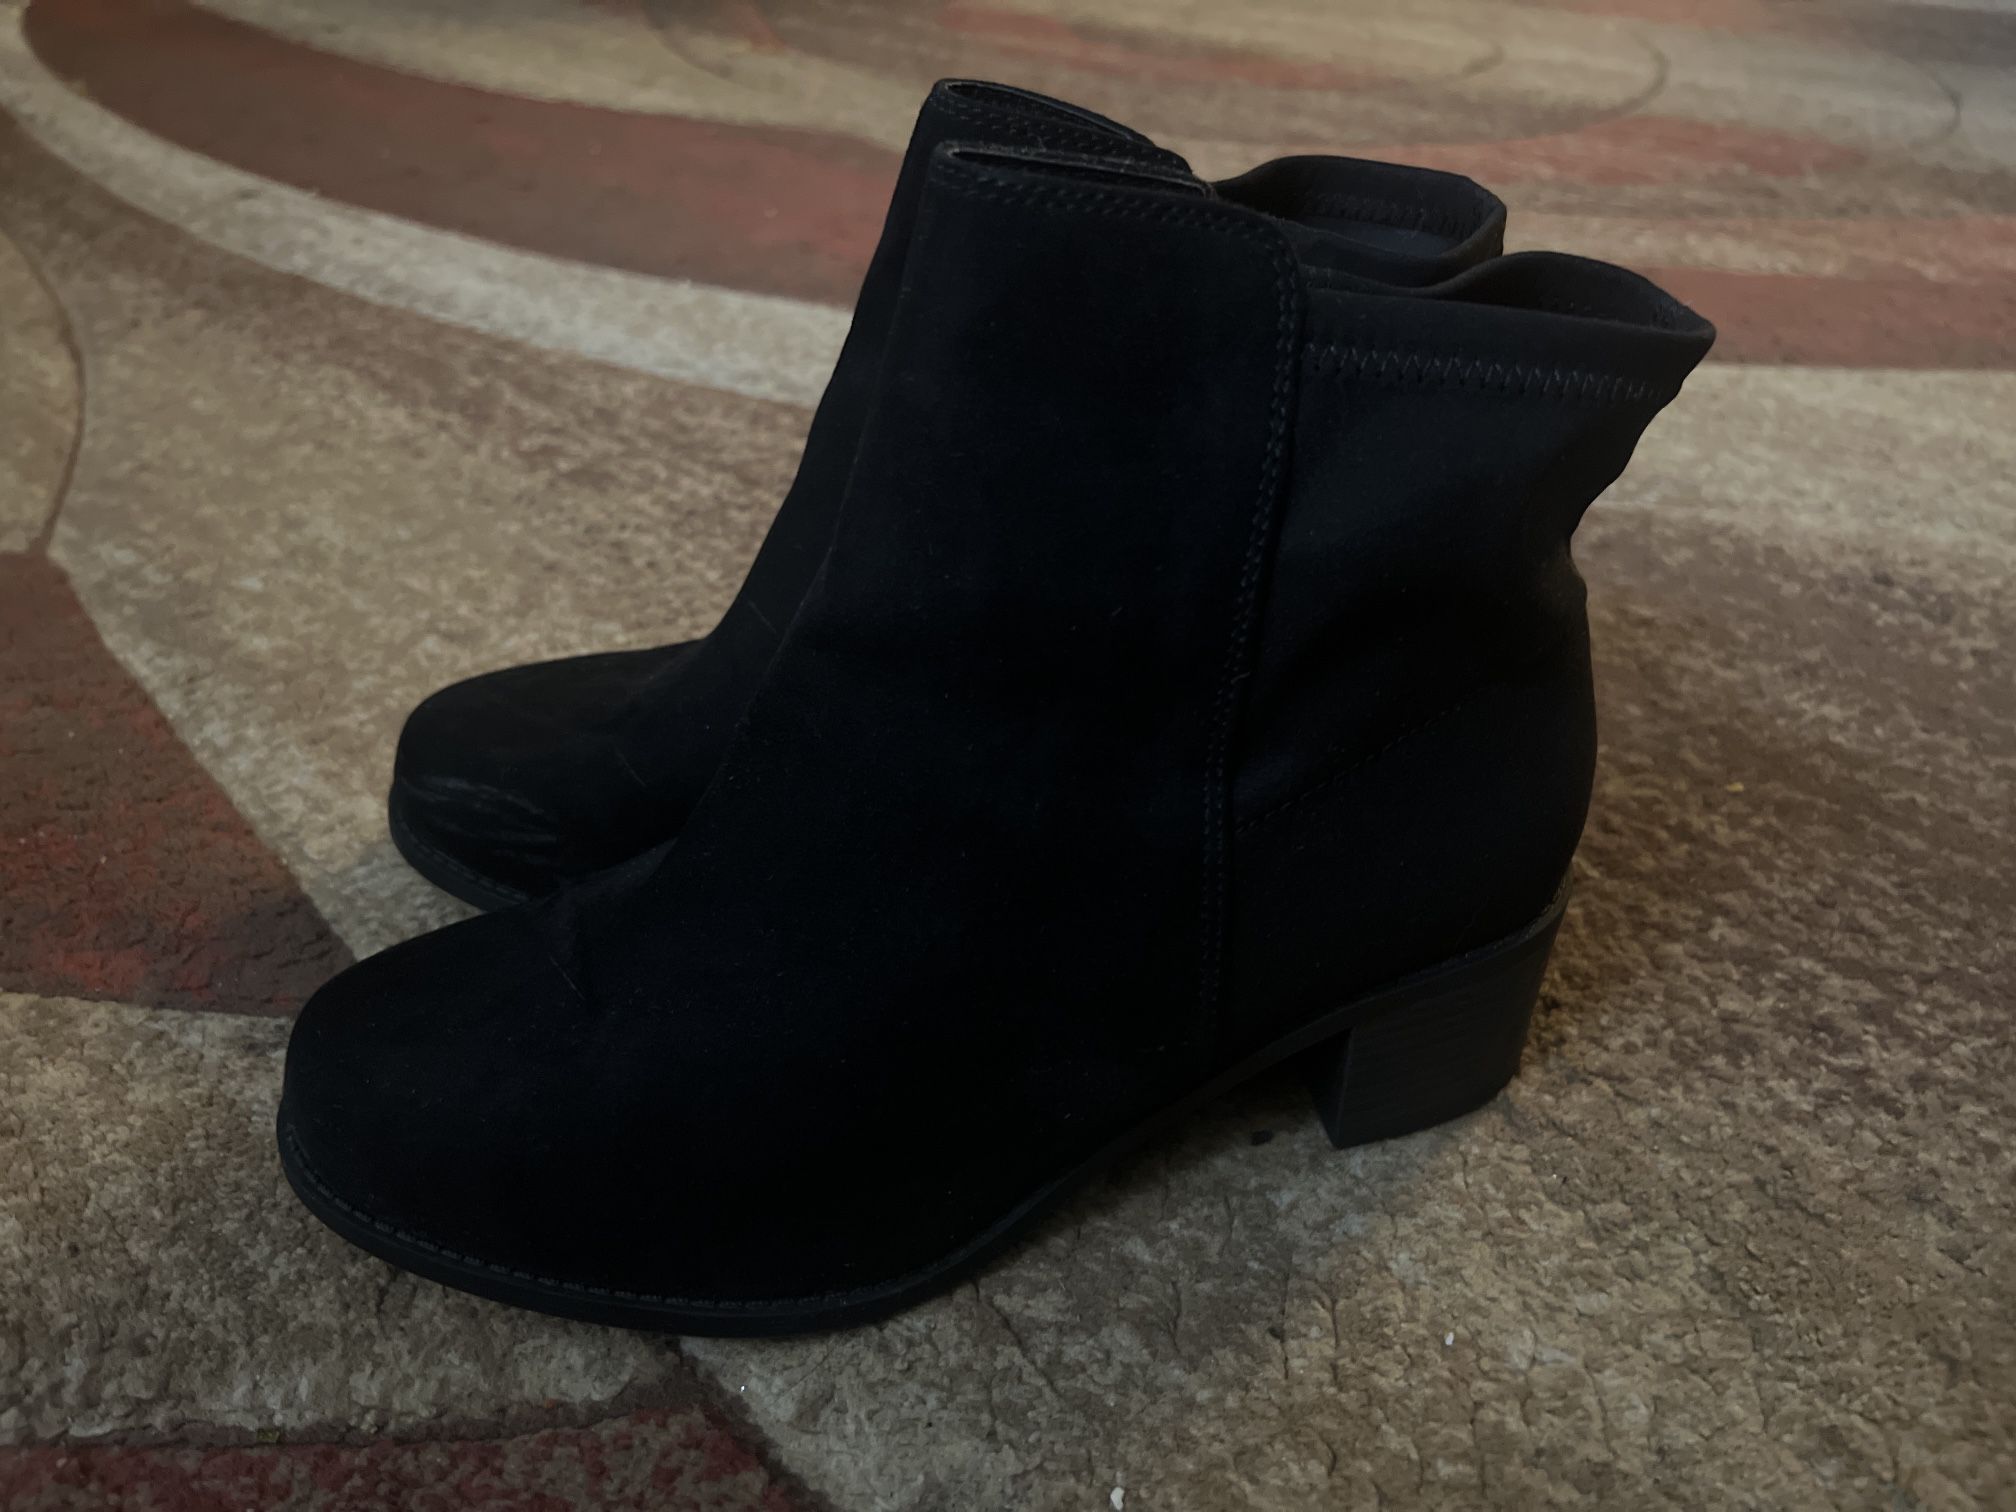 Suede booties (only worn twice to try but too big for me)